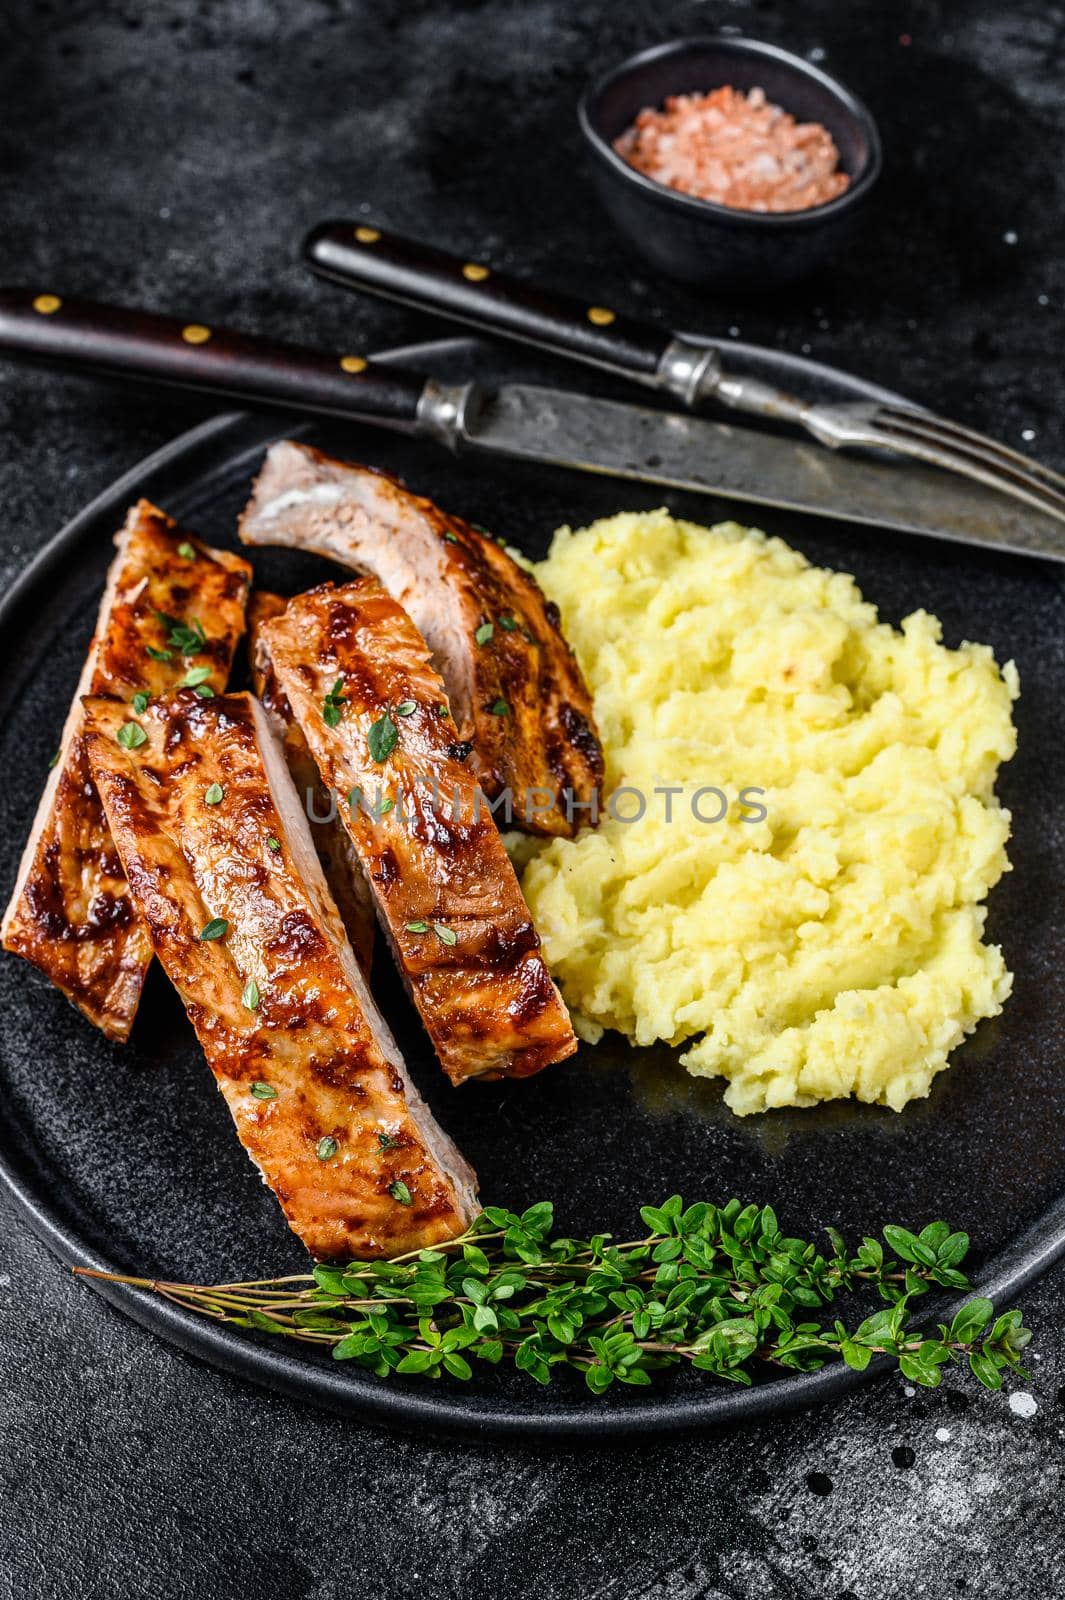 Sliced BBQ grilled pork rack spare ribs on a plate with mash potato. Black background. Top view by Composter